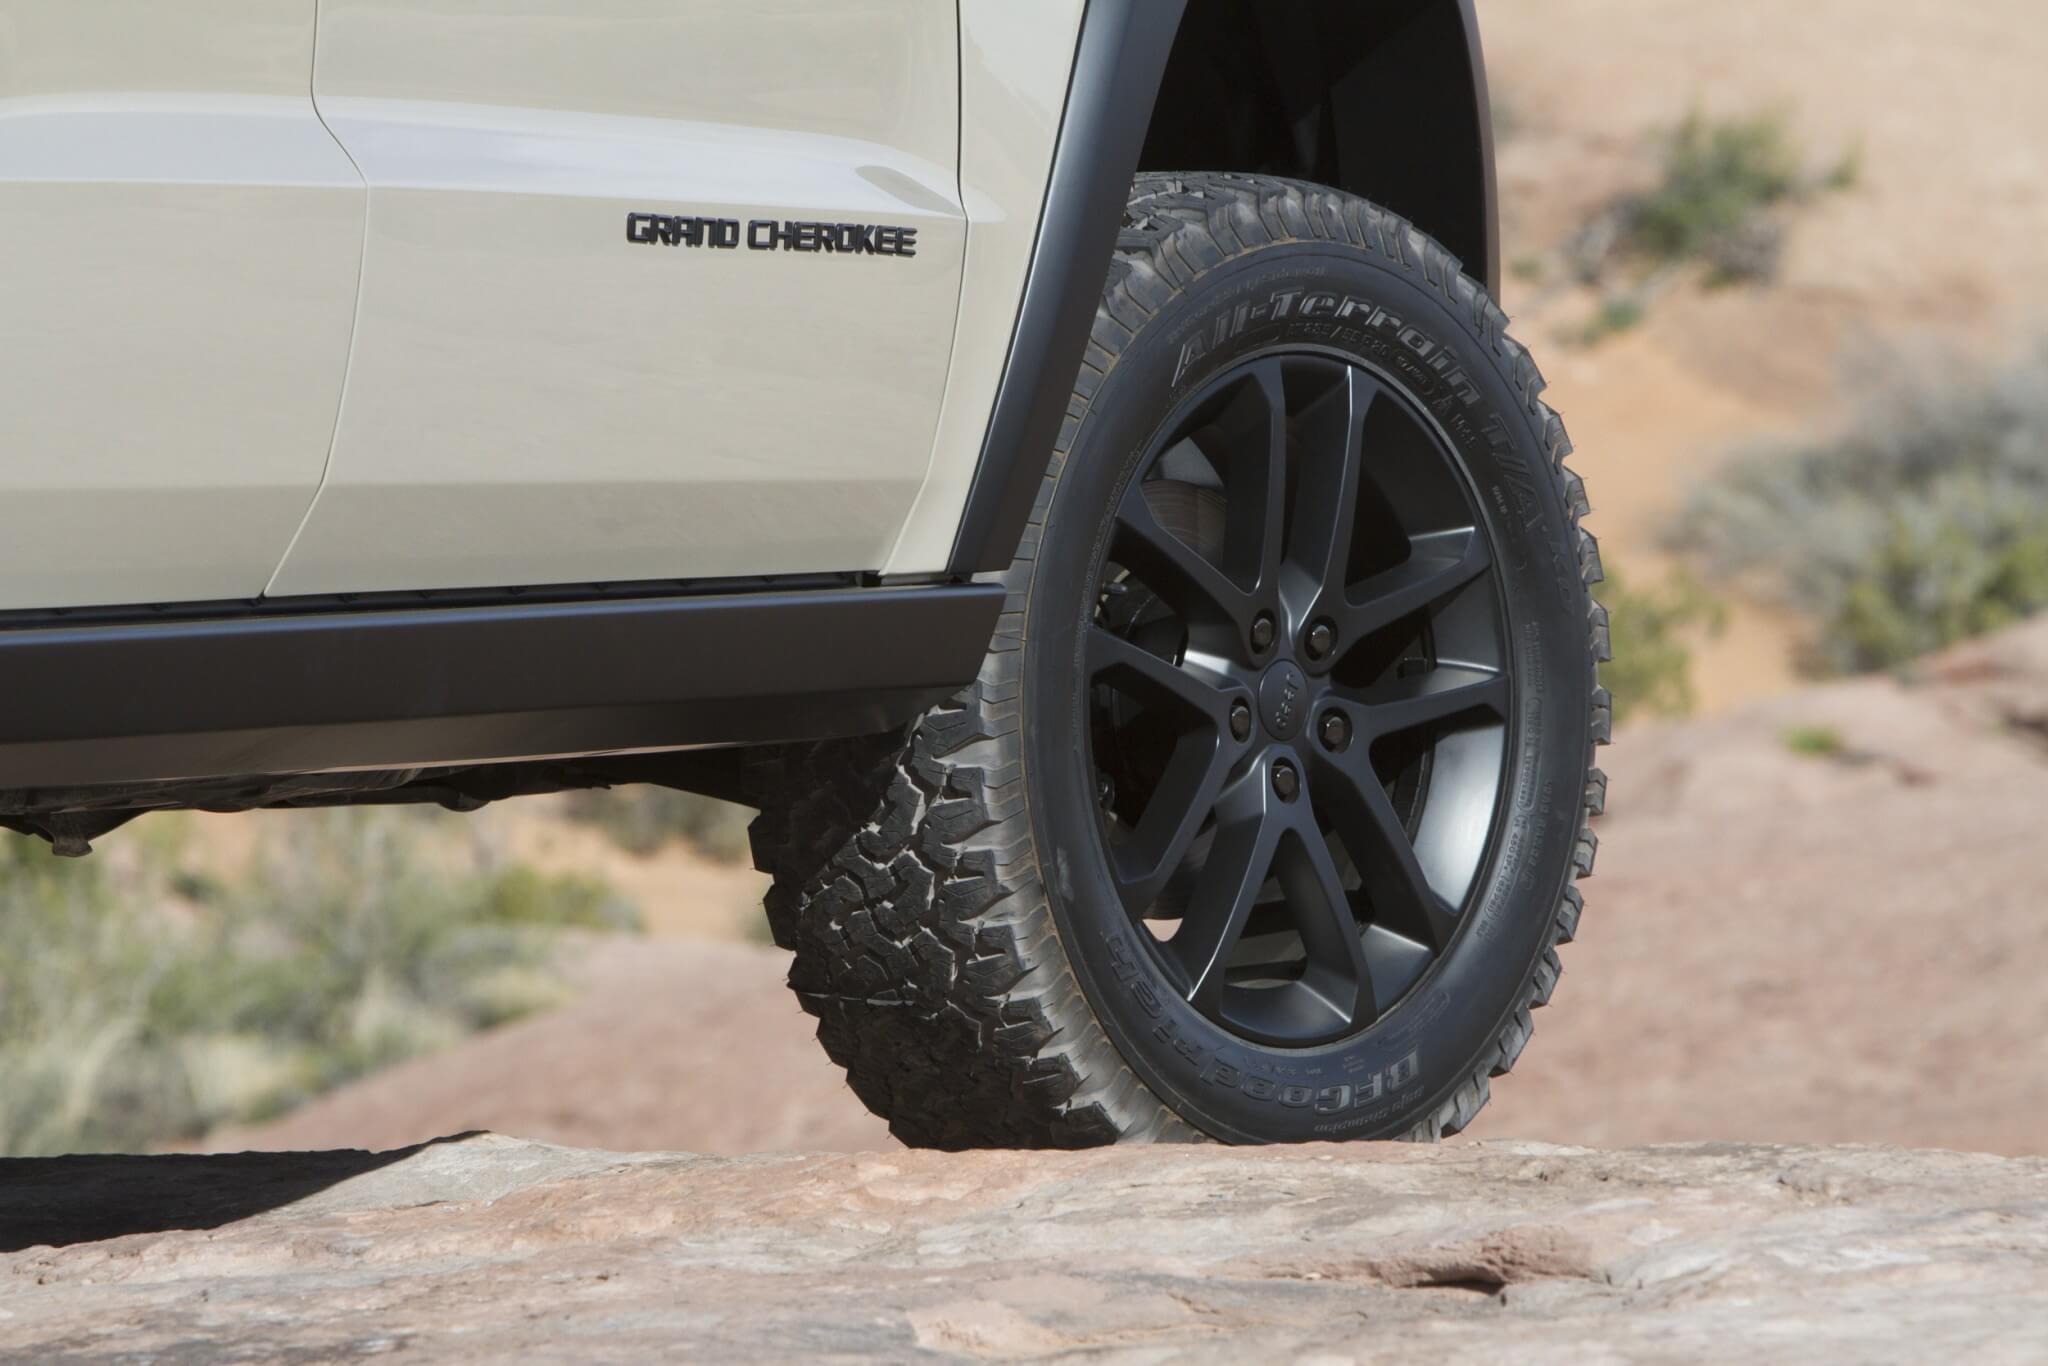 The tires are BFGoodrich All-Terrain KO tires that are 33 inches tall. They’re mounted on some prototype Mopar cast aluminum wheels. Only time will tell if these wheels will become available, but similar wheels are sure to pop up in the aftermarket now that we’ve been shown how good they look. 